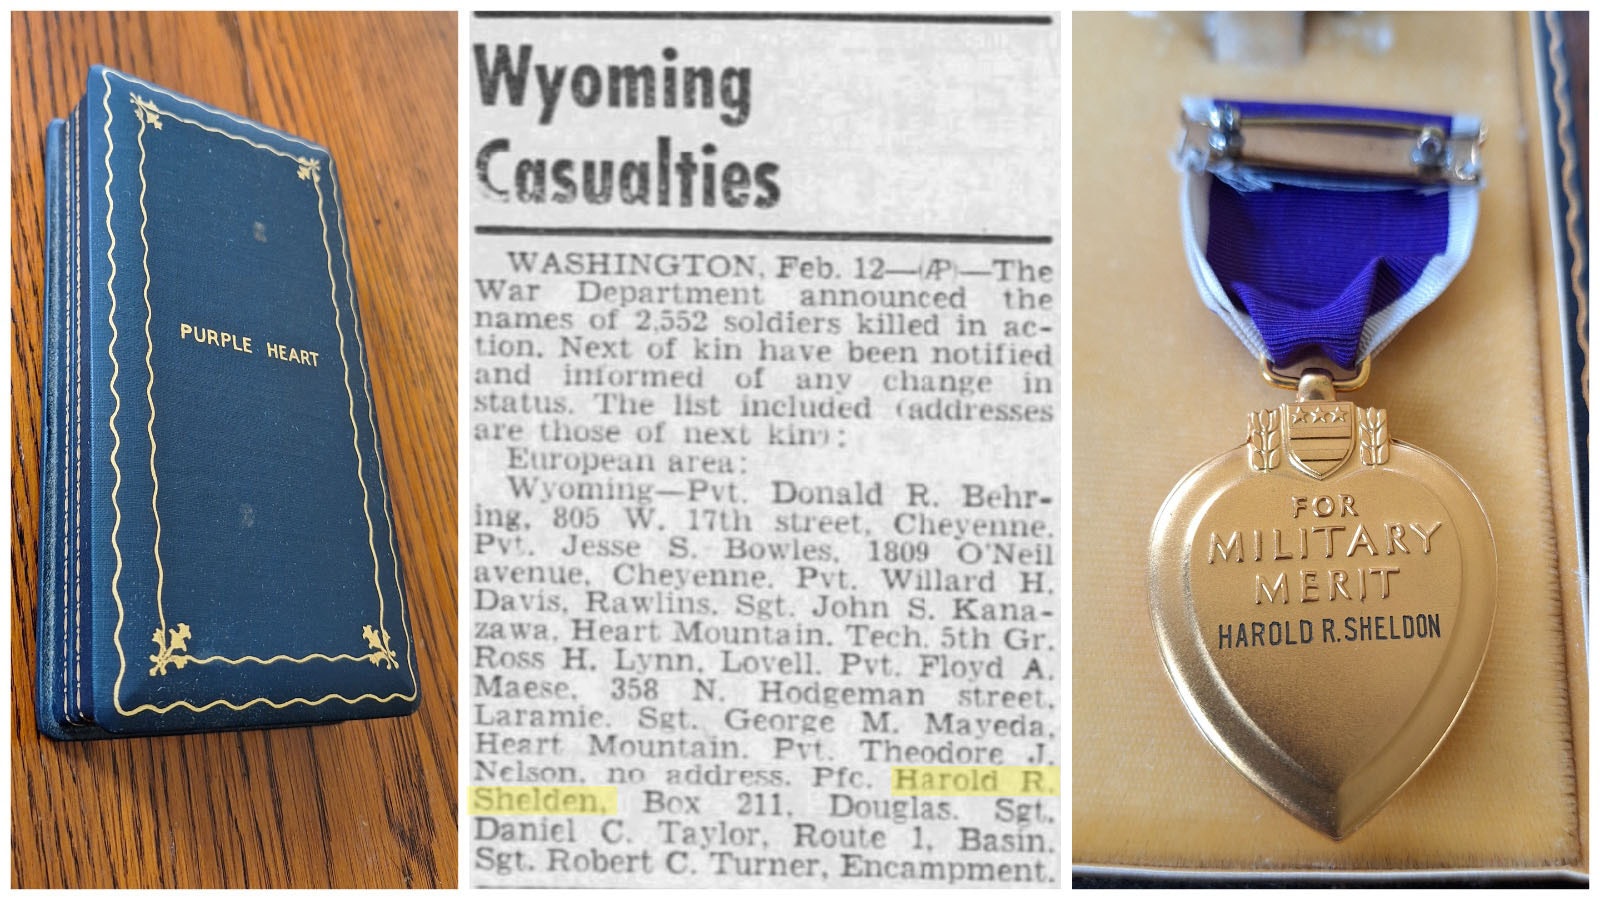 Scott Rayl shares these photos of the Harold Shelden's Purple Heart and its box sandwiched around a column from the Feb. 12, 1945, Casper Tribune-Herald announcing Wyoming World War II casualties, including Shelden. (Note: The War Department misspelled his name on the decoration)